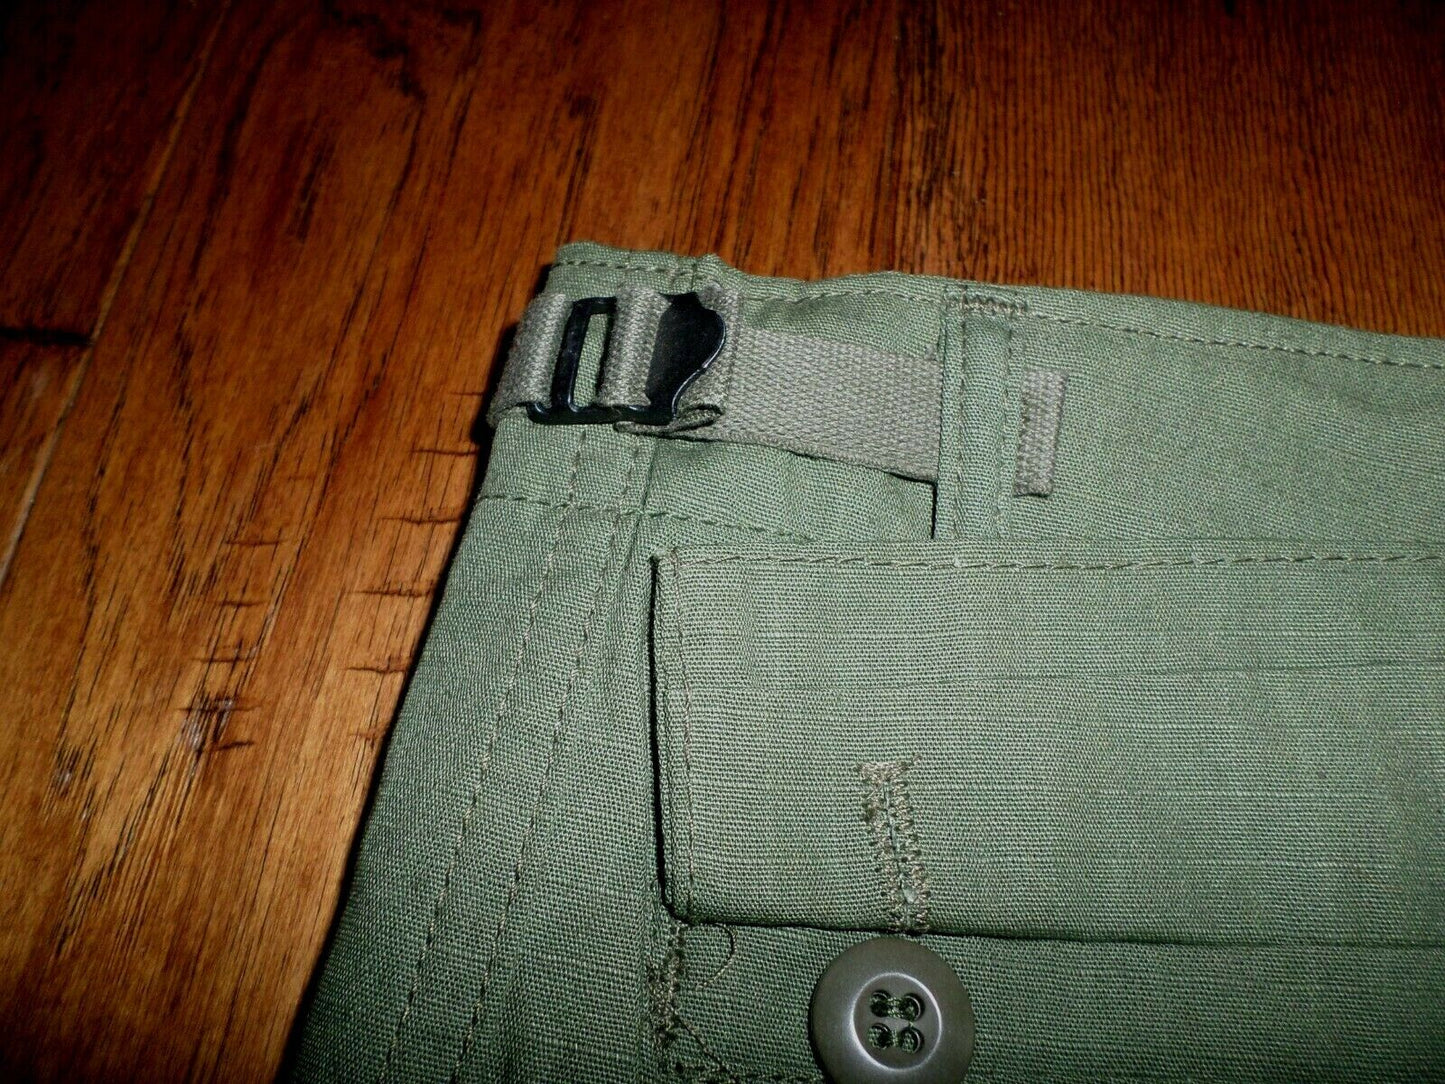 MILITARY OD GREEN BDU CARGO SHORTS 6 POCKET ARMY COMBAT U.S.A MADE FRONTLINE